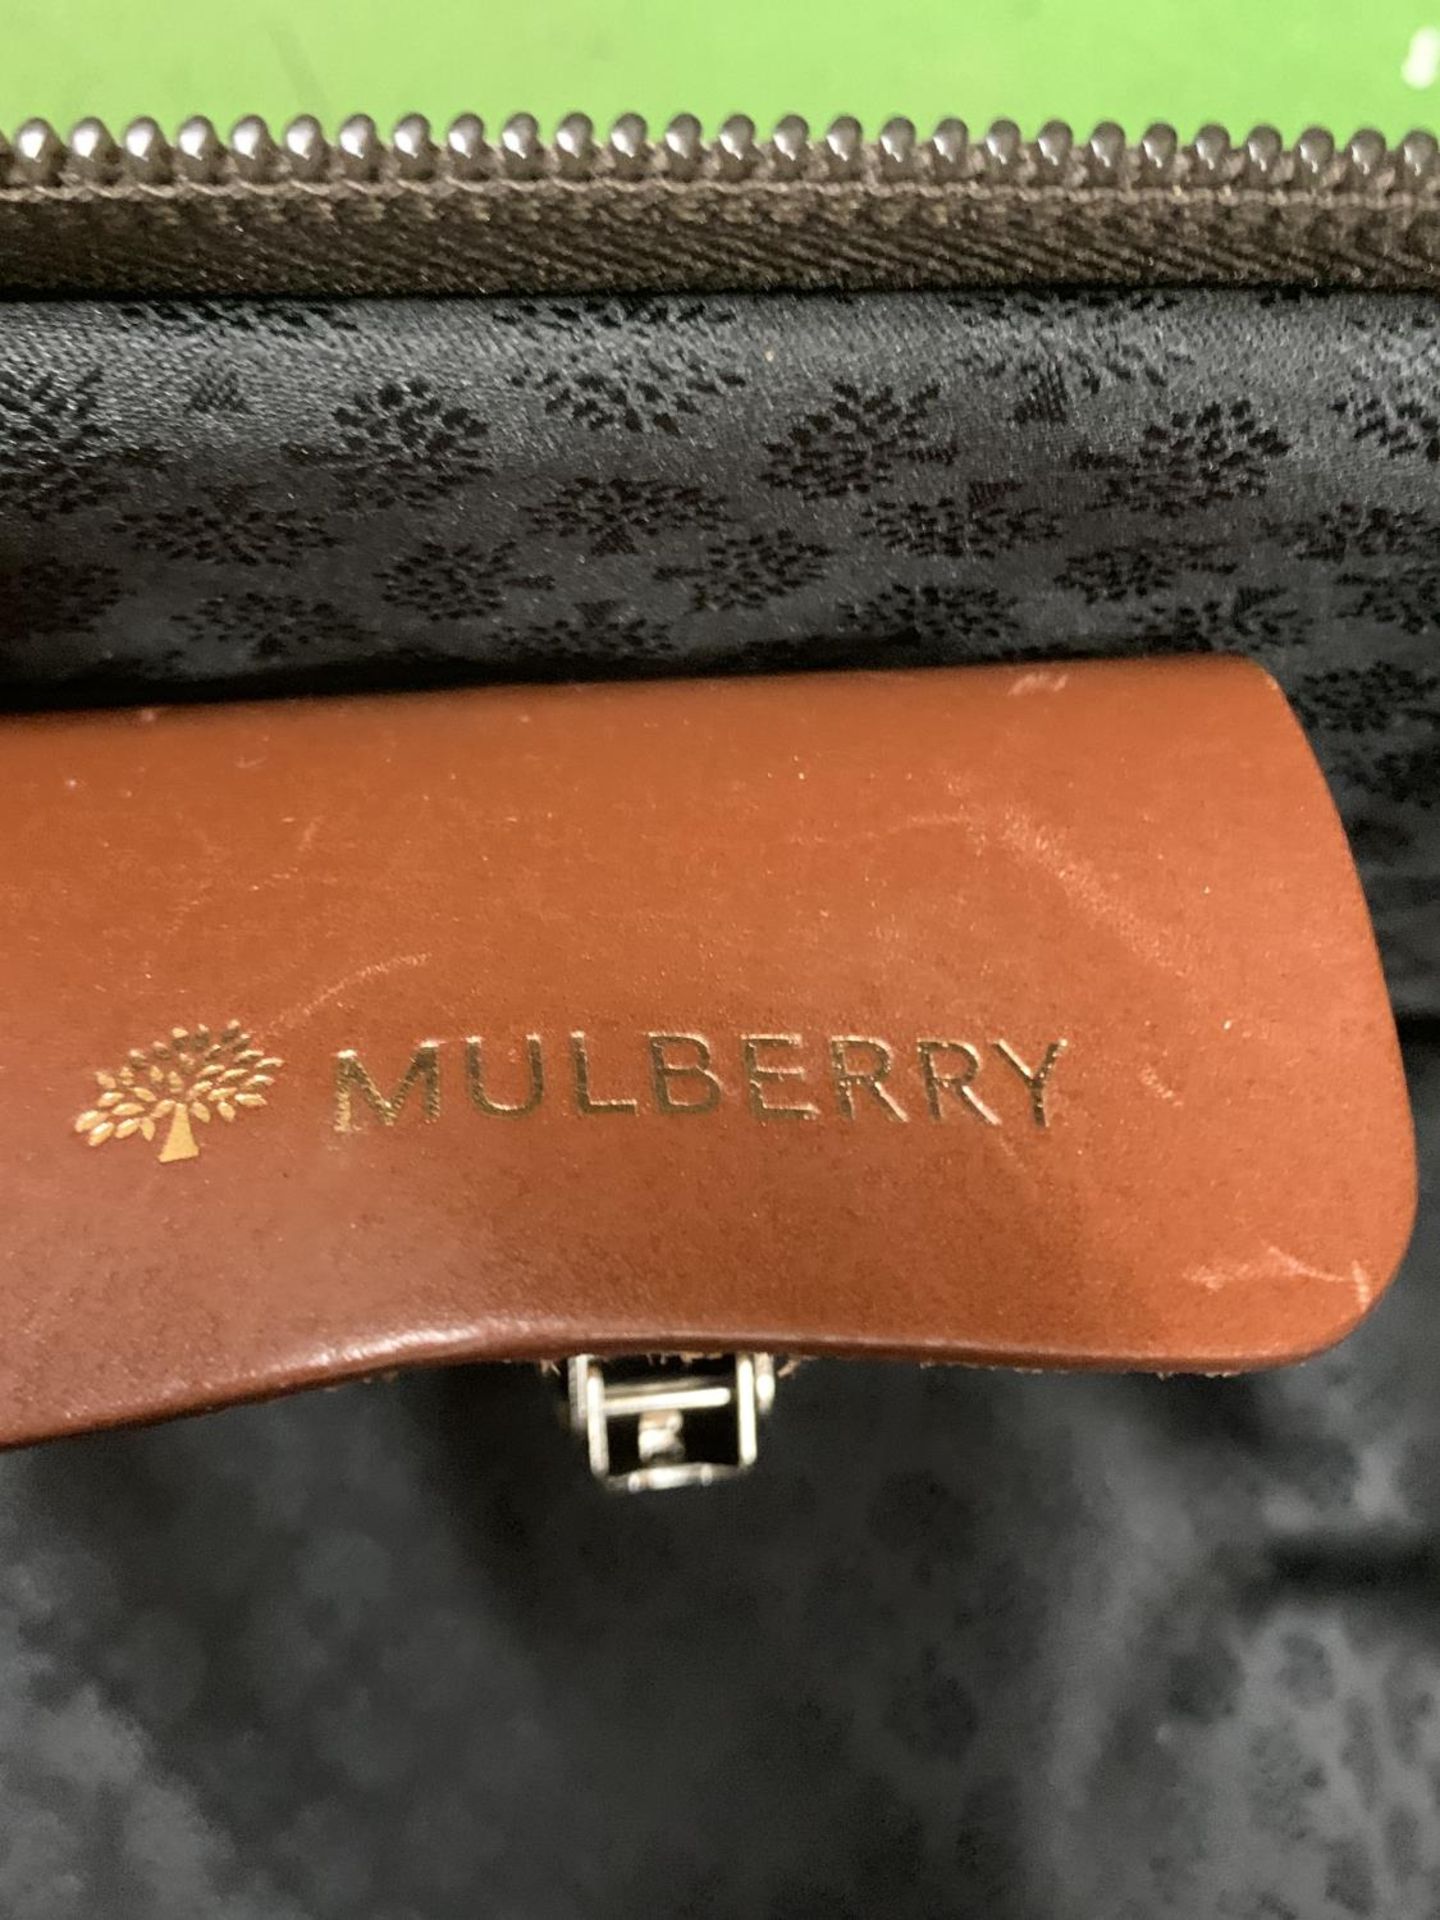 A MULBERRY SUITCASE - Image 4 of 4